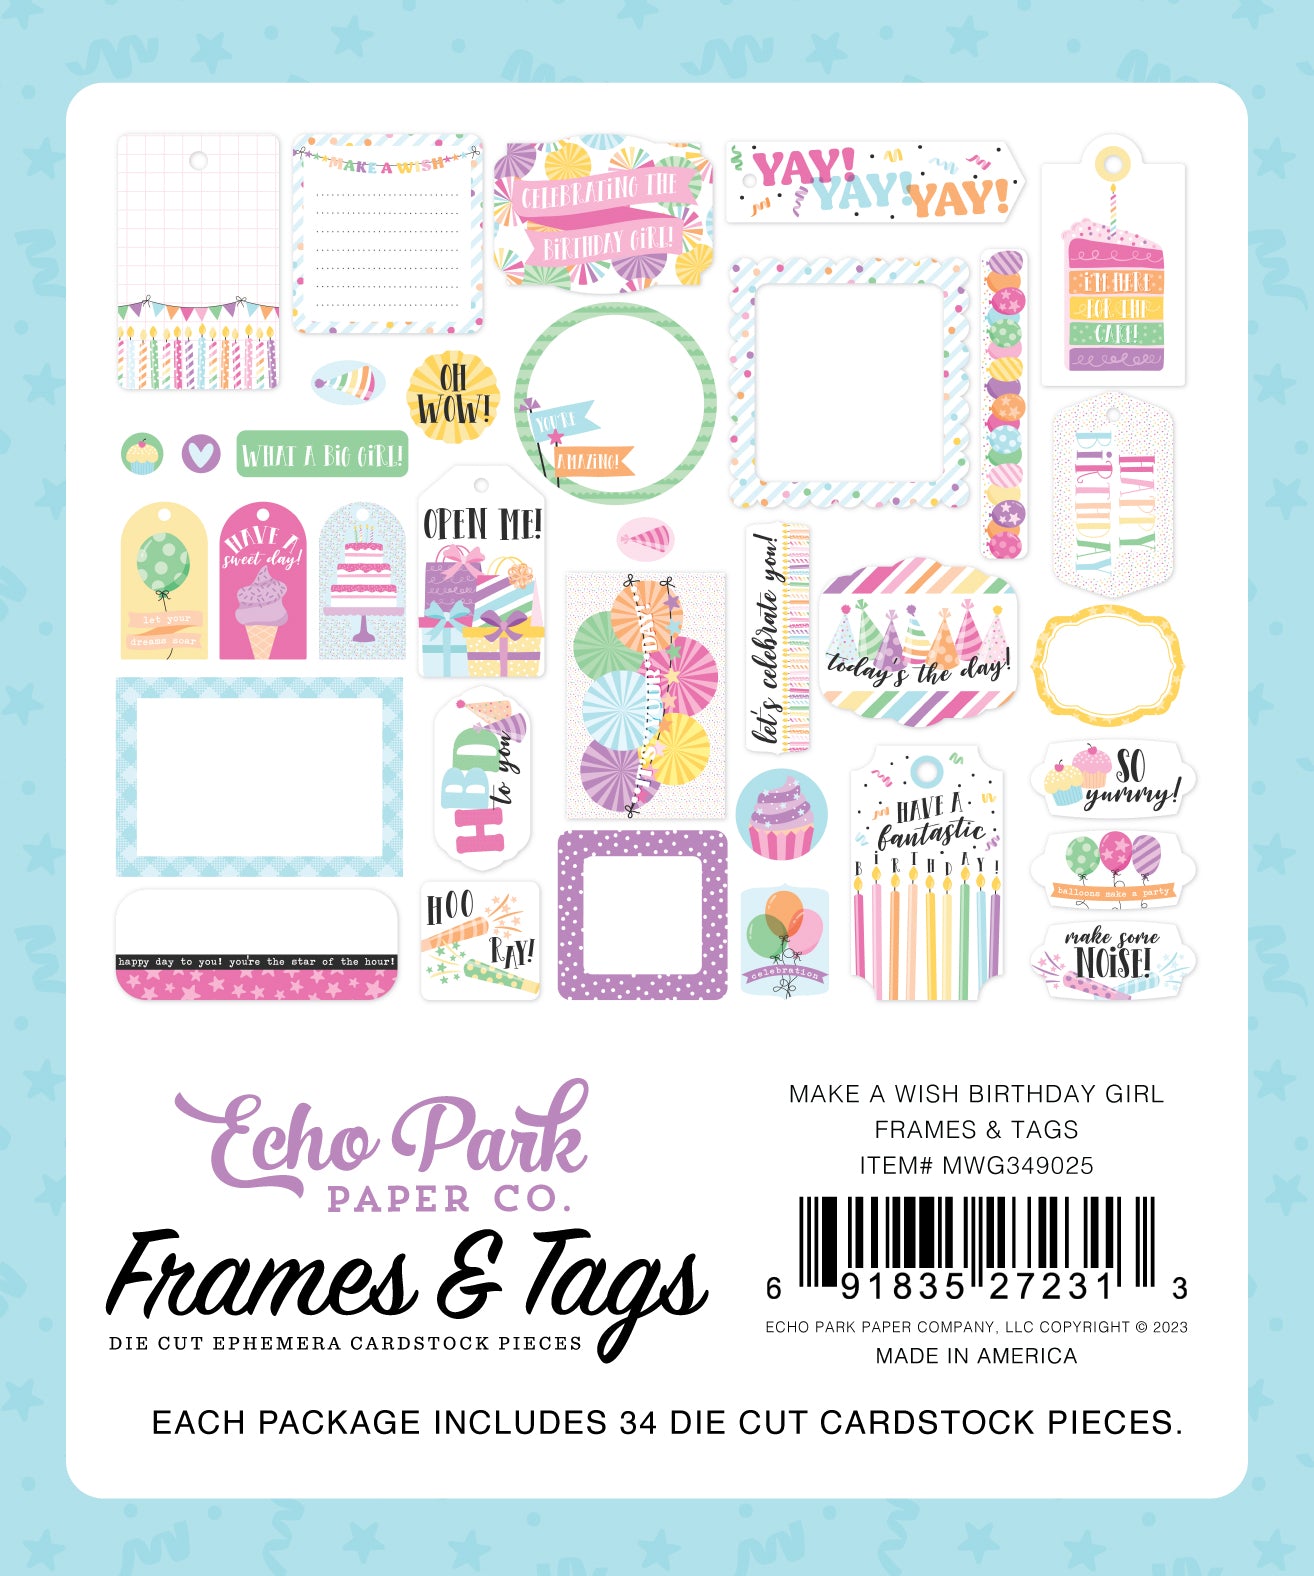 Make a Wish Birthday Girl Collection Scrapbook Frames & Tags by Echo Park Paper